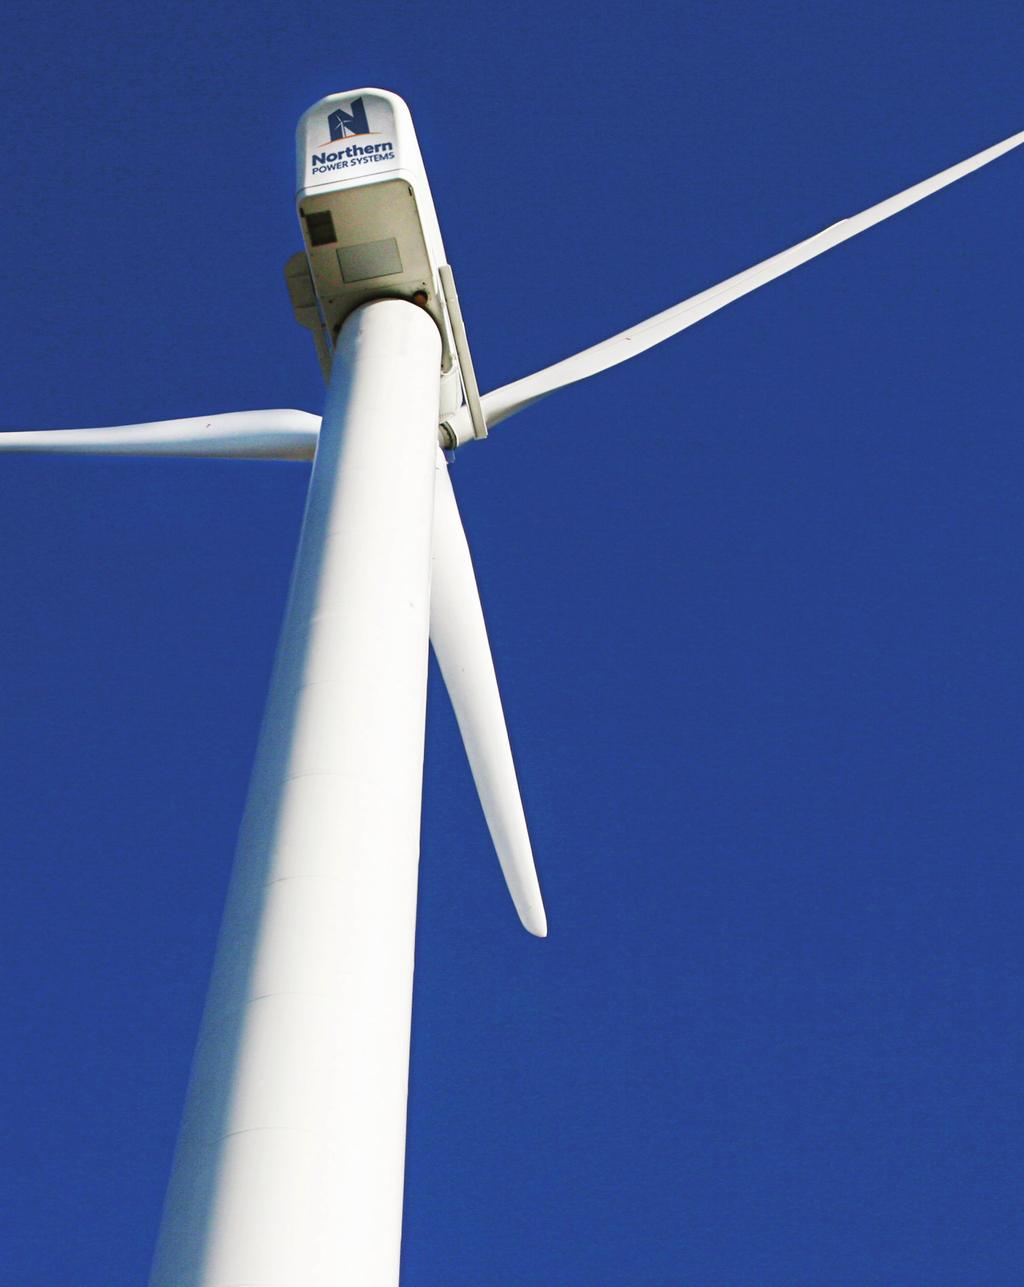 Annual Energy Production: 21-Meter Rotor All turbines capture wind. The Northern Power 100 is designed to do it better. 400 Model Northern Power 100 350 Design Class IEC IIA (air density 1.